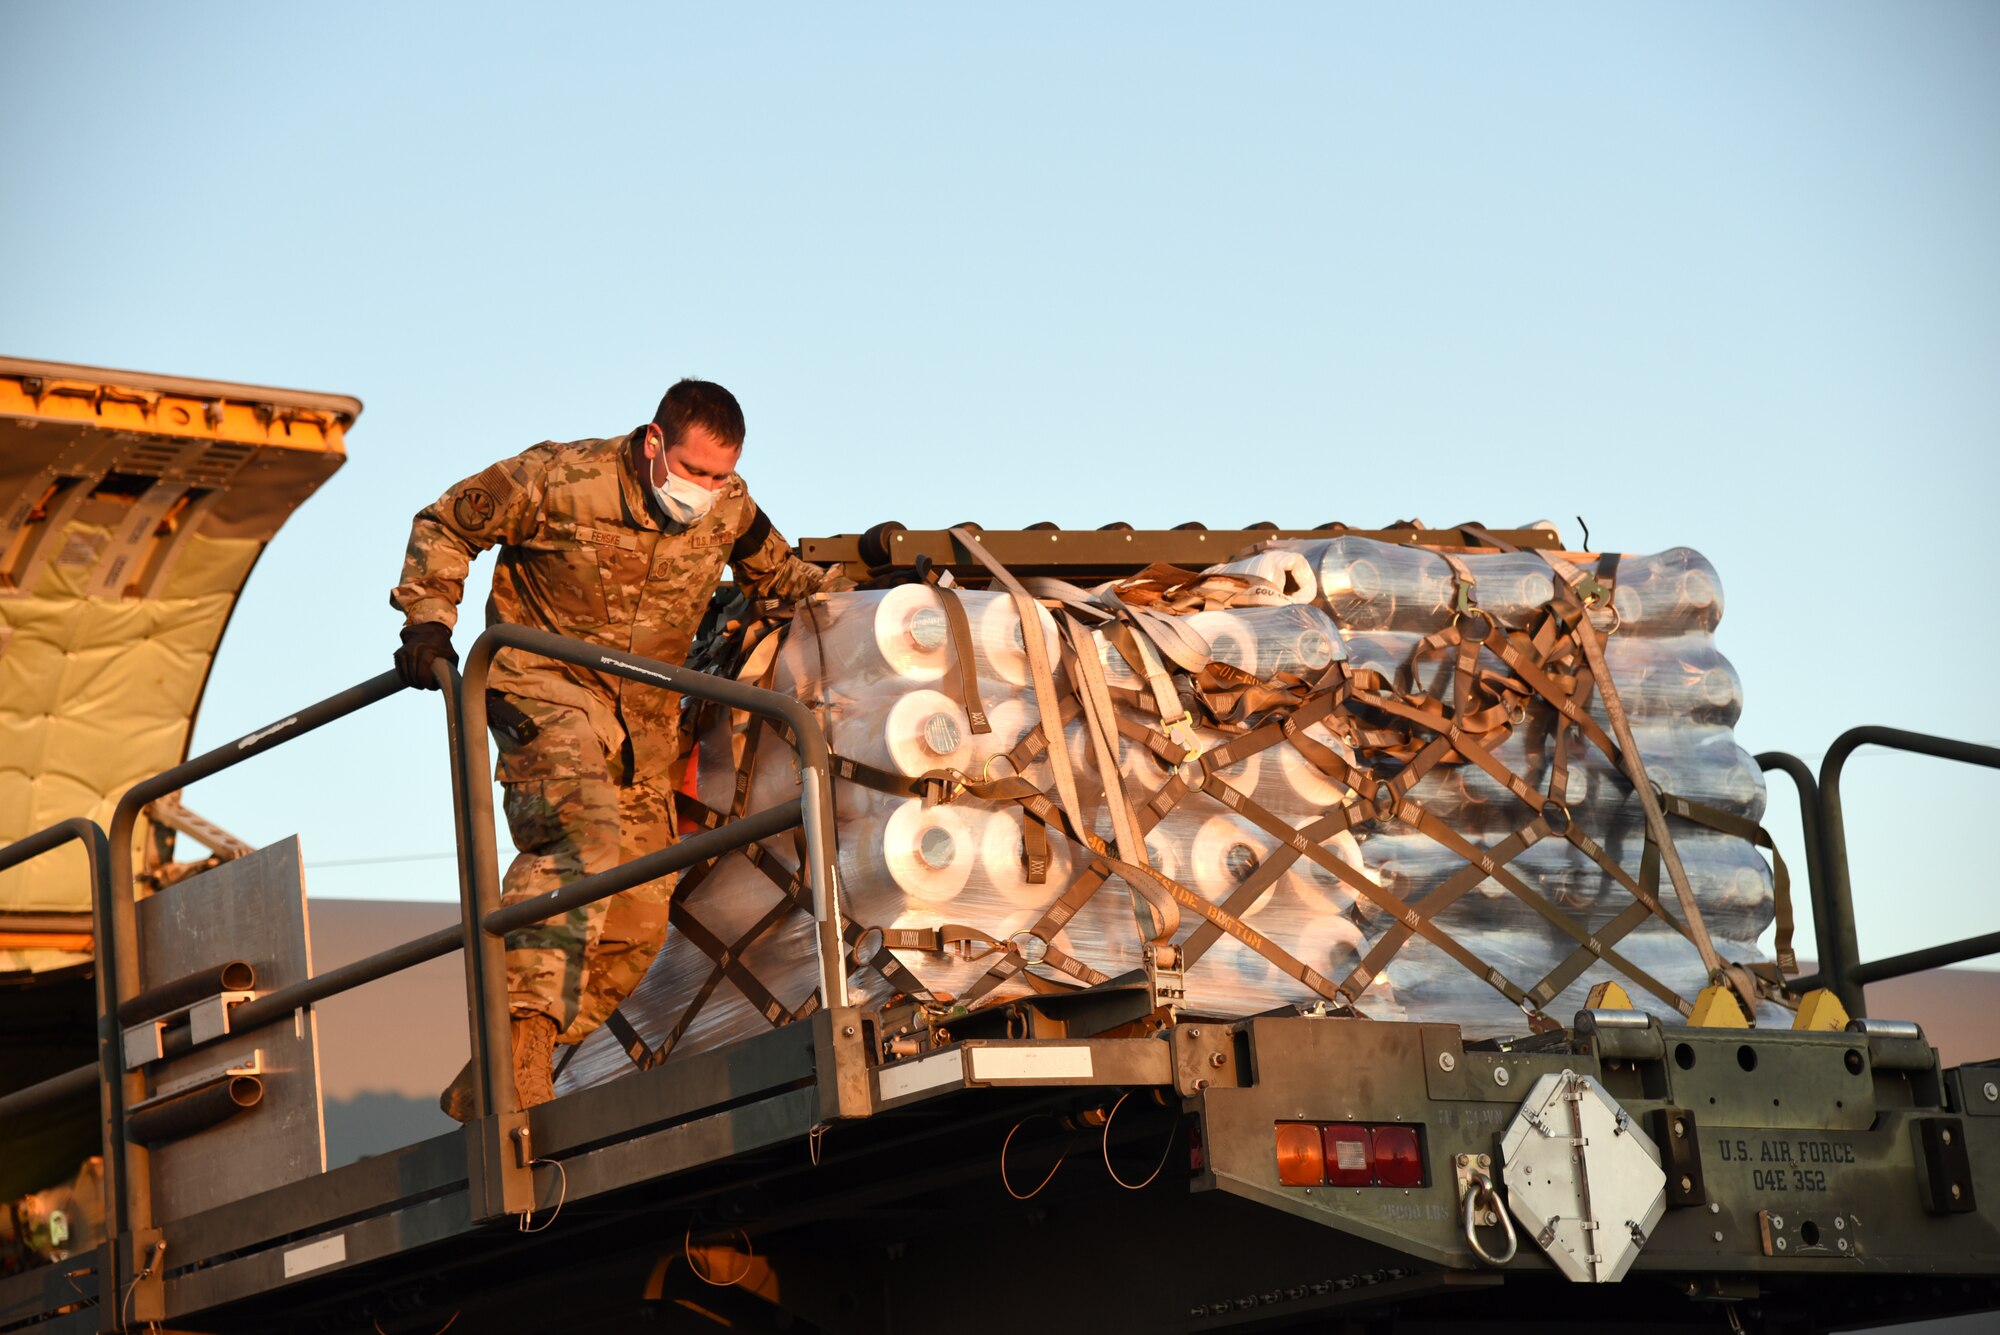 161st Air Refueling Wing service members unload material from a KC-135 Stratotanker to be used to make protective gowns for statewide use April 9, 2020 at Goldwater Air National Guard Base, Phoenix. The delivery is part of the Arizona National Guard’s response to community needs during this state of emergency (U.S. Air National Guard photo by Tech. Sgt. Michael Matkin).